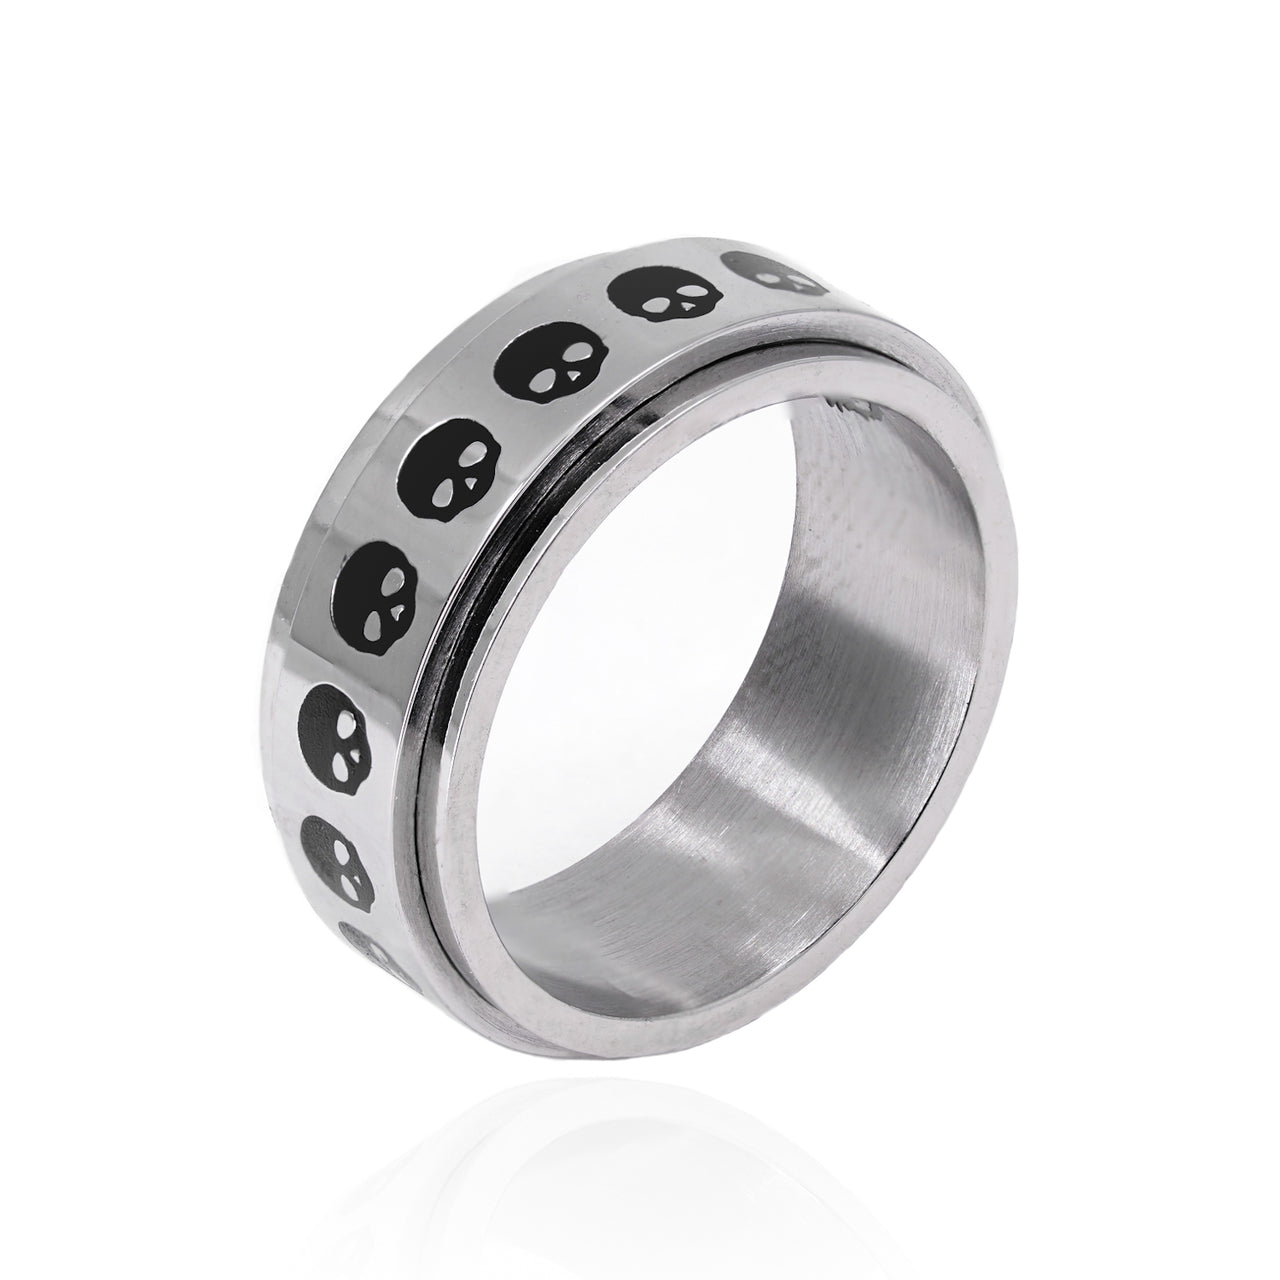 Stainless Steel Spinner Ring with skulls by Black Feather Design